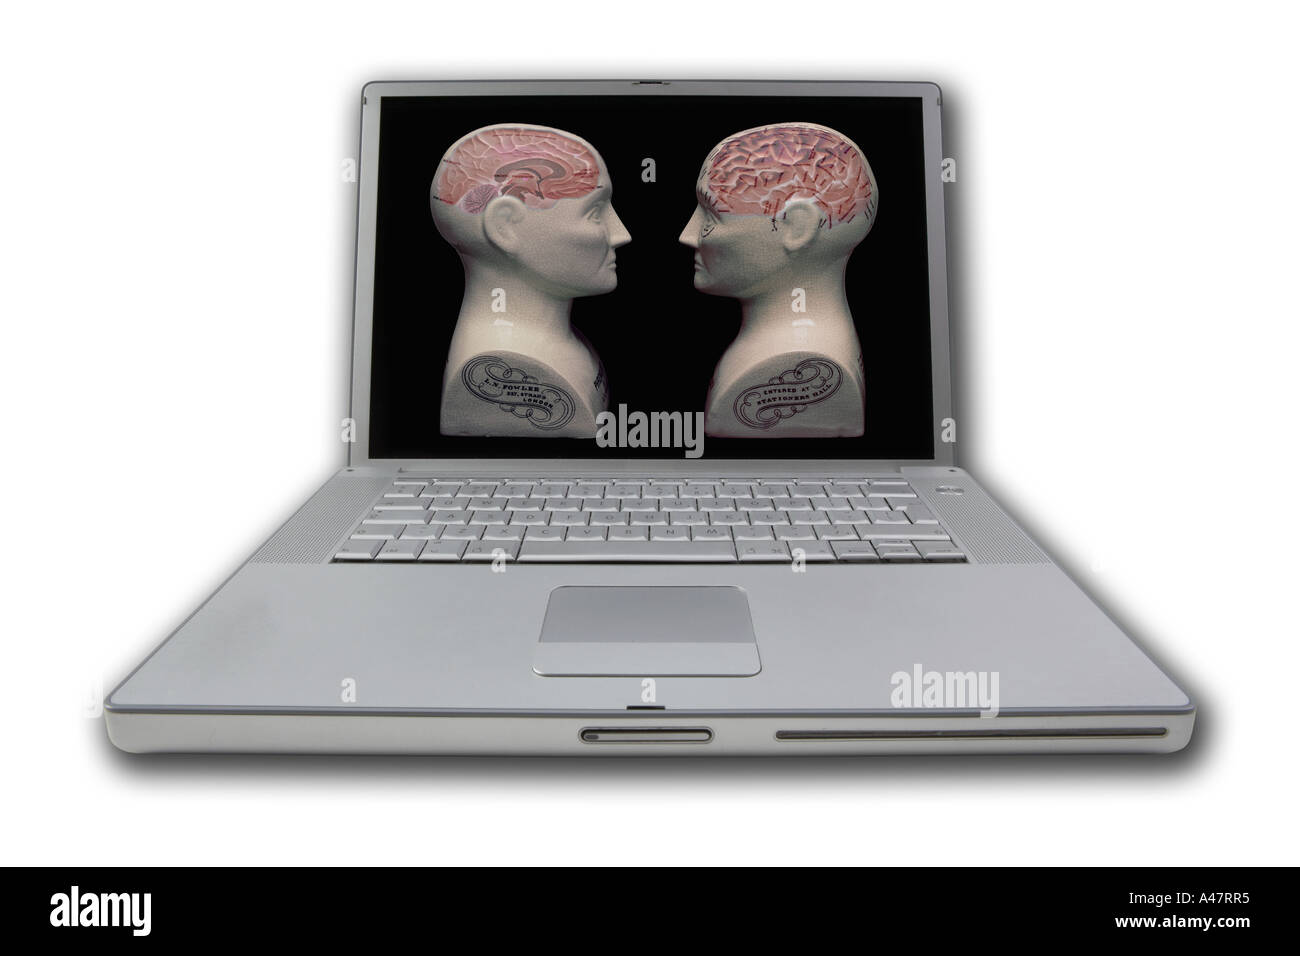 LAP TOP NOTE BOOK COMPUTER ON WHITE BACKGROUND DISPLAYING PICTURE OF TWO PHRENOLOGY HEADS Stock Photo